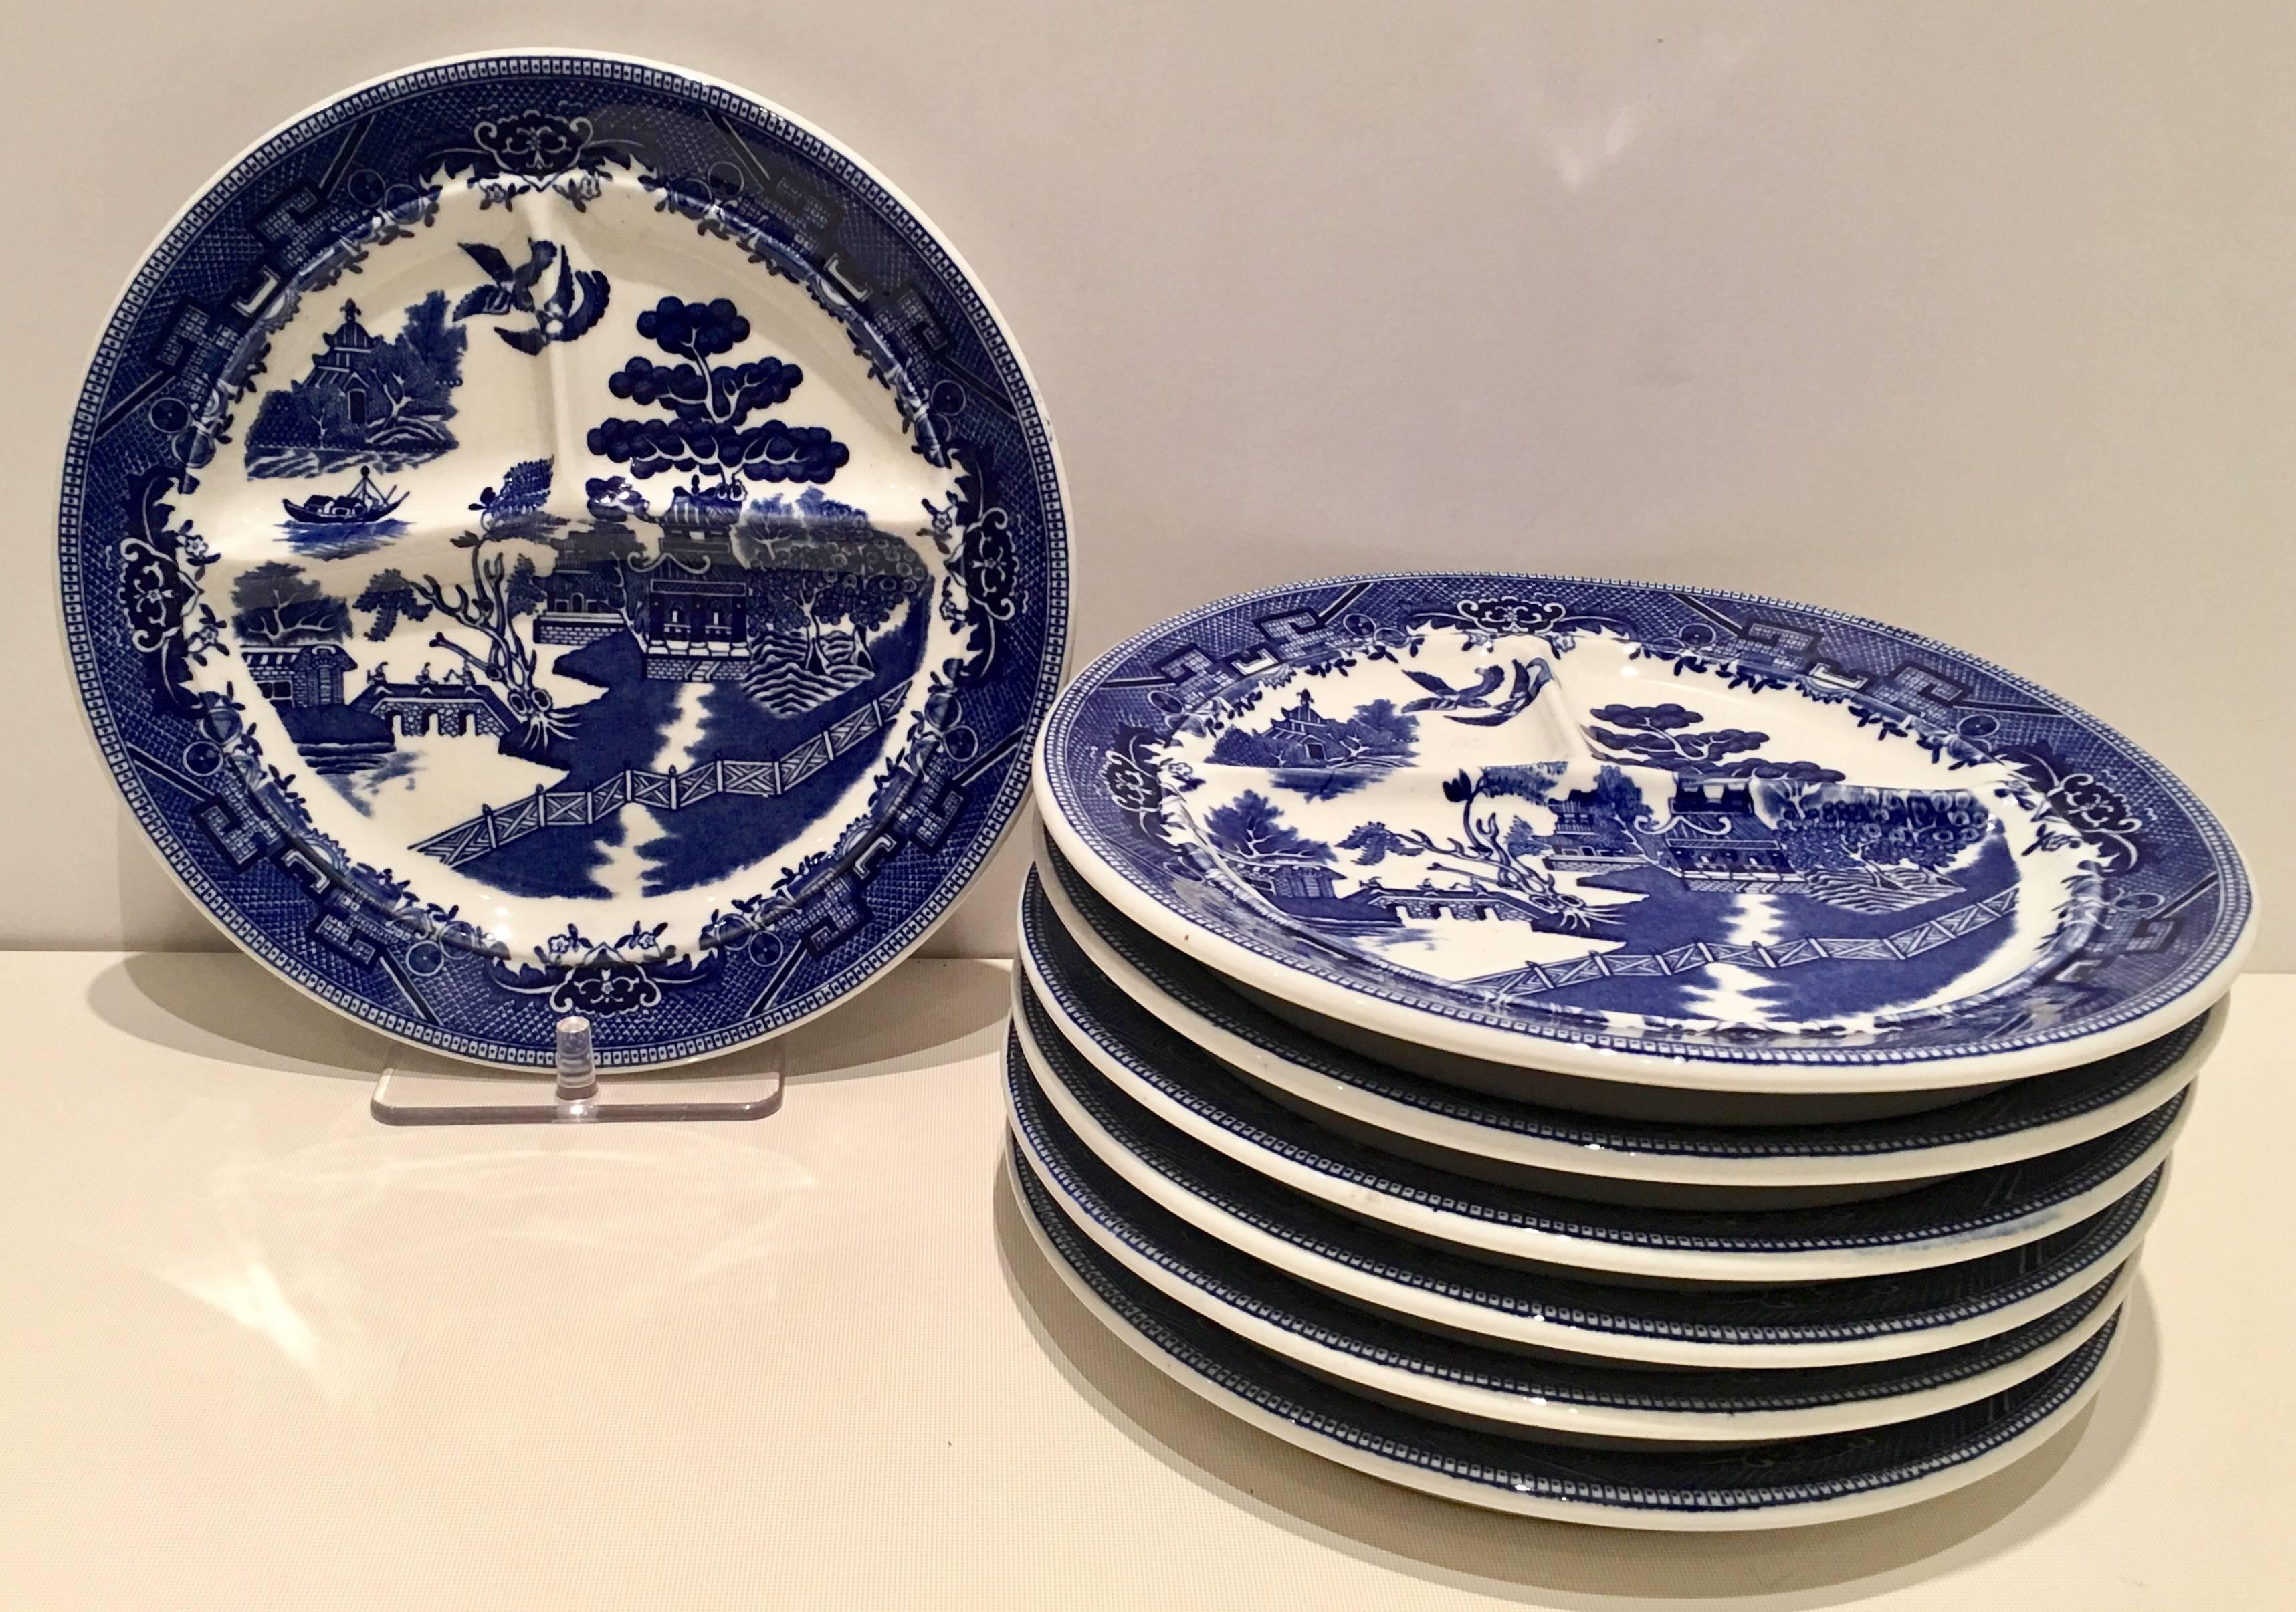 Vintage set of seven ceramic divided grill dinner plates by Shenago. Only one piece is signed on the underside, Shenago China New Castle.
The Willow pattern features a large Pagoda style home with a large willow tree with two love birds as the